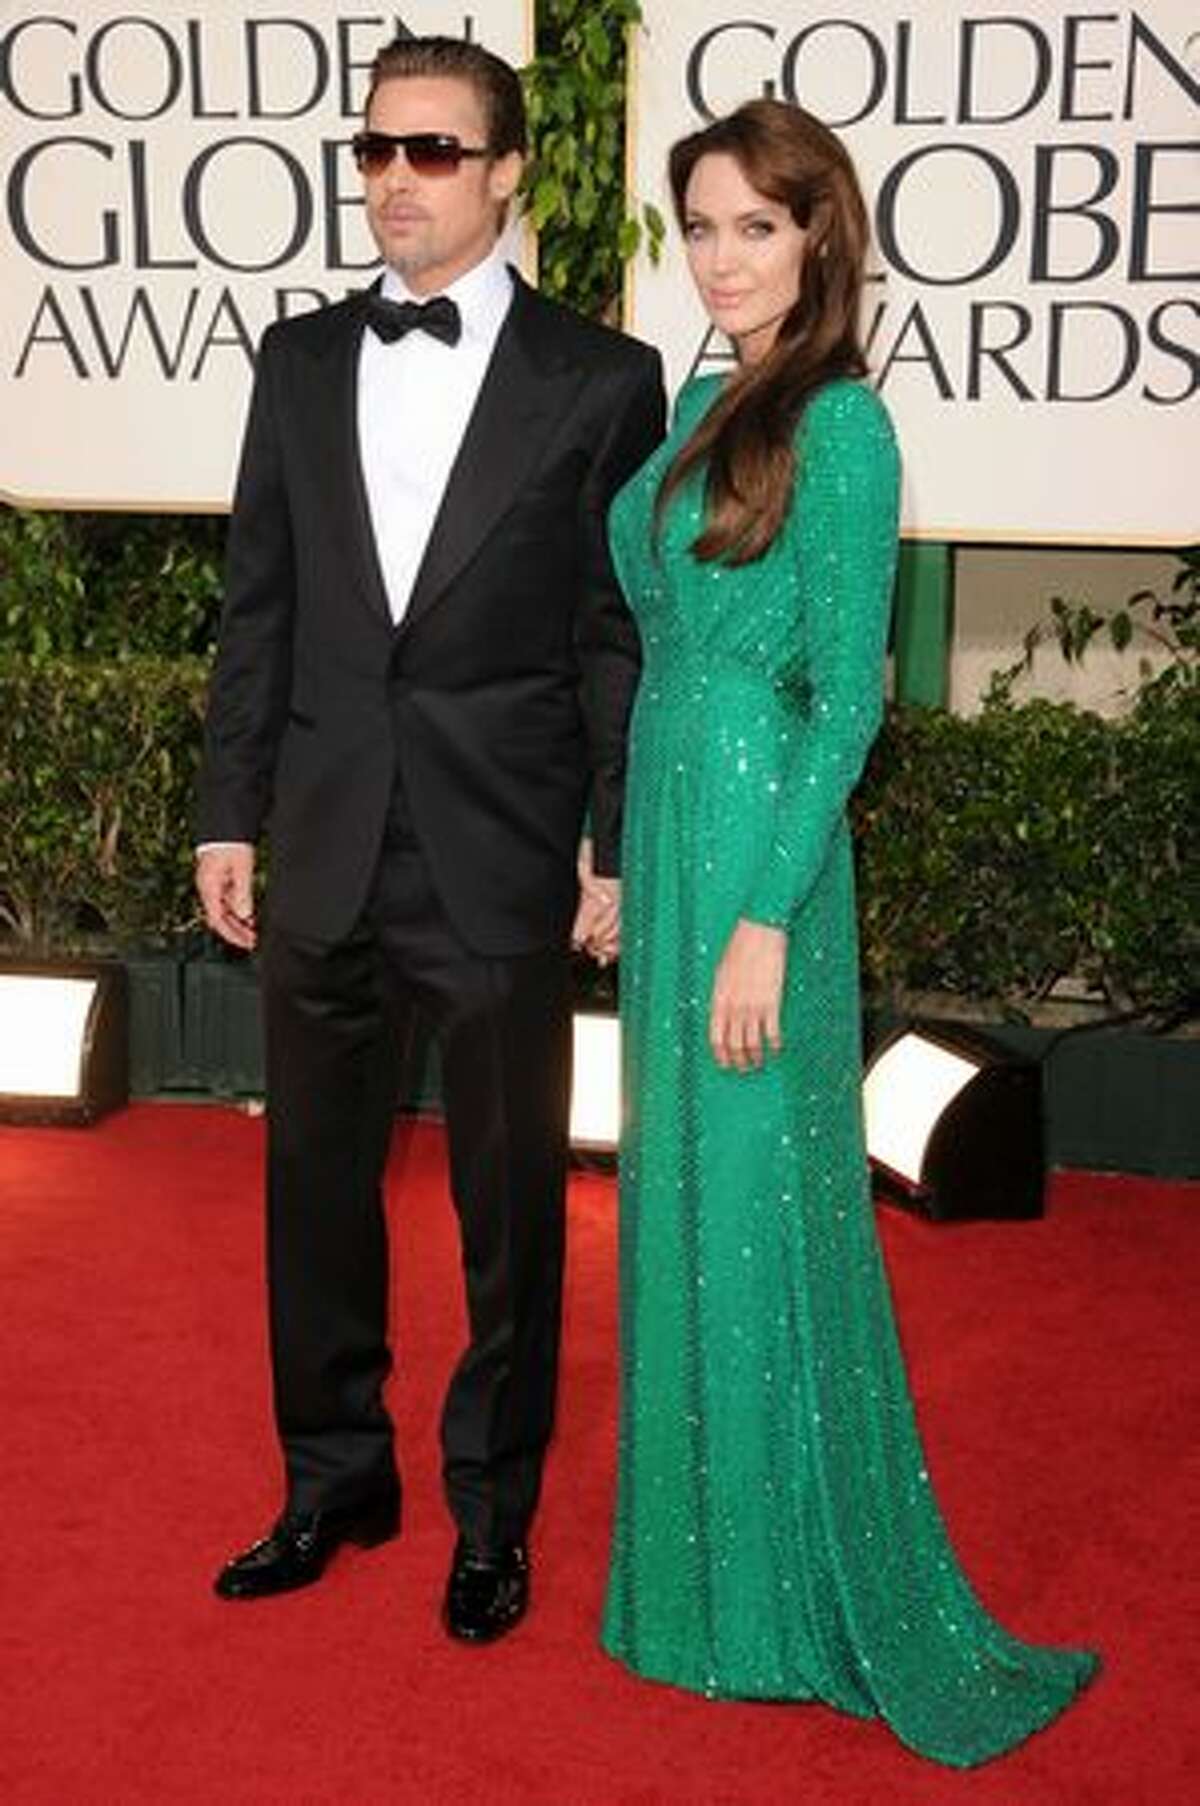 Actor Brad Pitt (left) and actress Angelina Jolie arrive at the 68th annual Golden Globe Awards held at The Beverly Hilton hotel in Beverly Hills, Calif., on Sunday, Jan. 16, 2011.